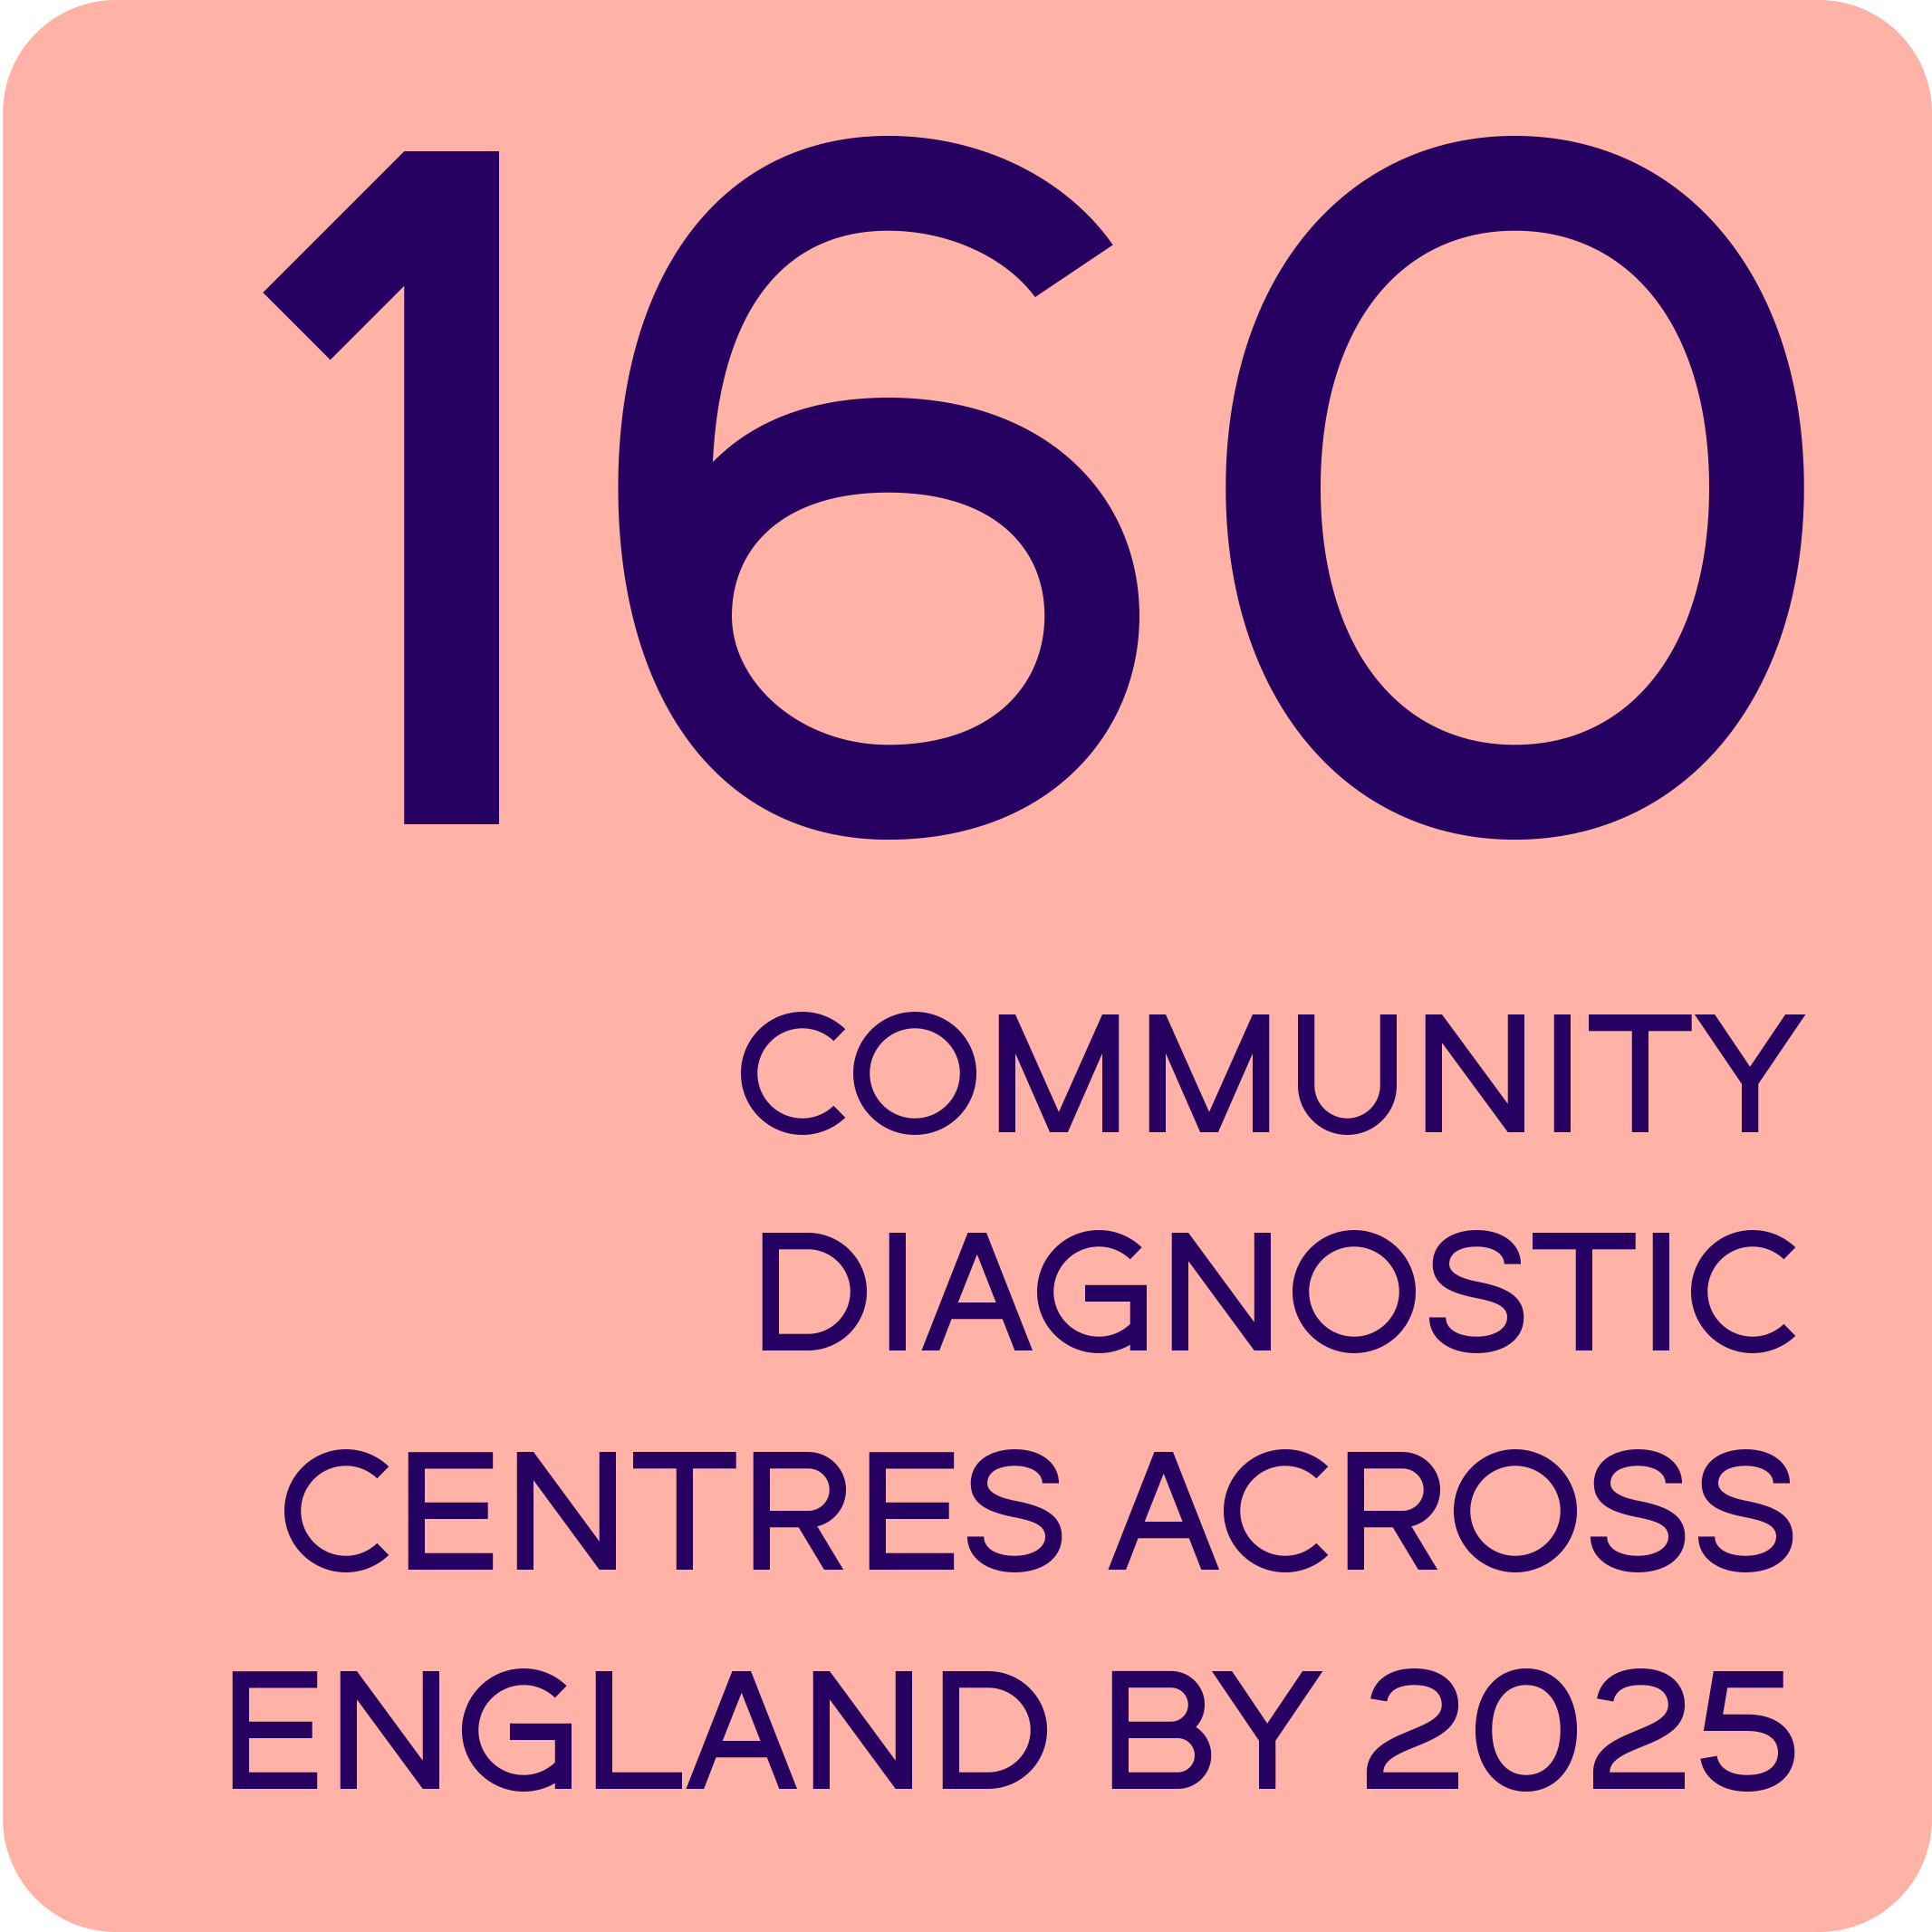 one hundered and sixty community diagnostic centres